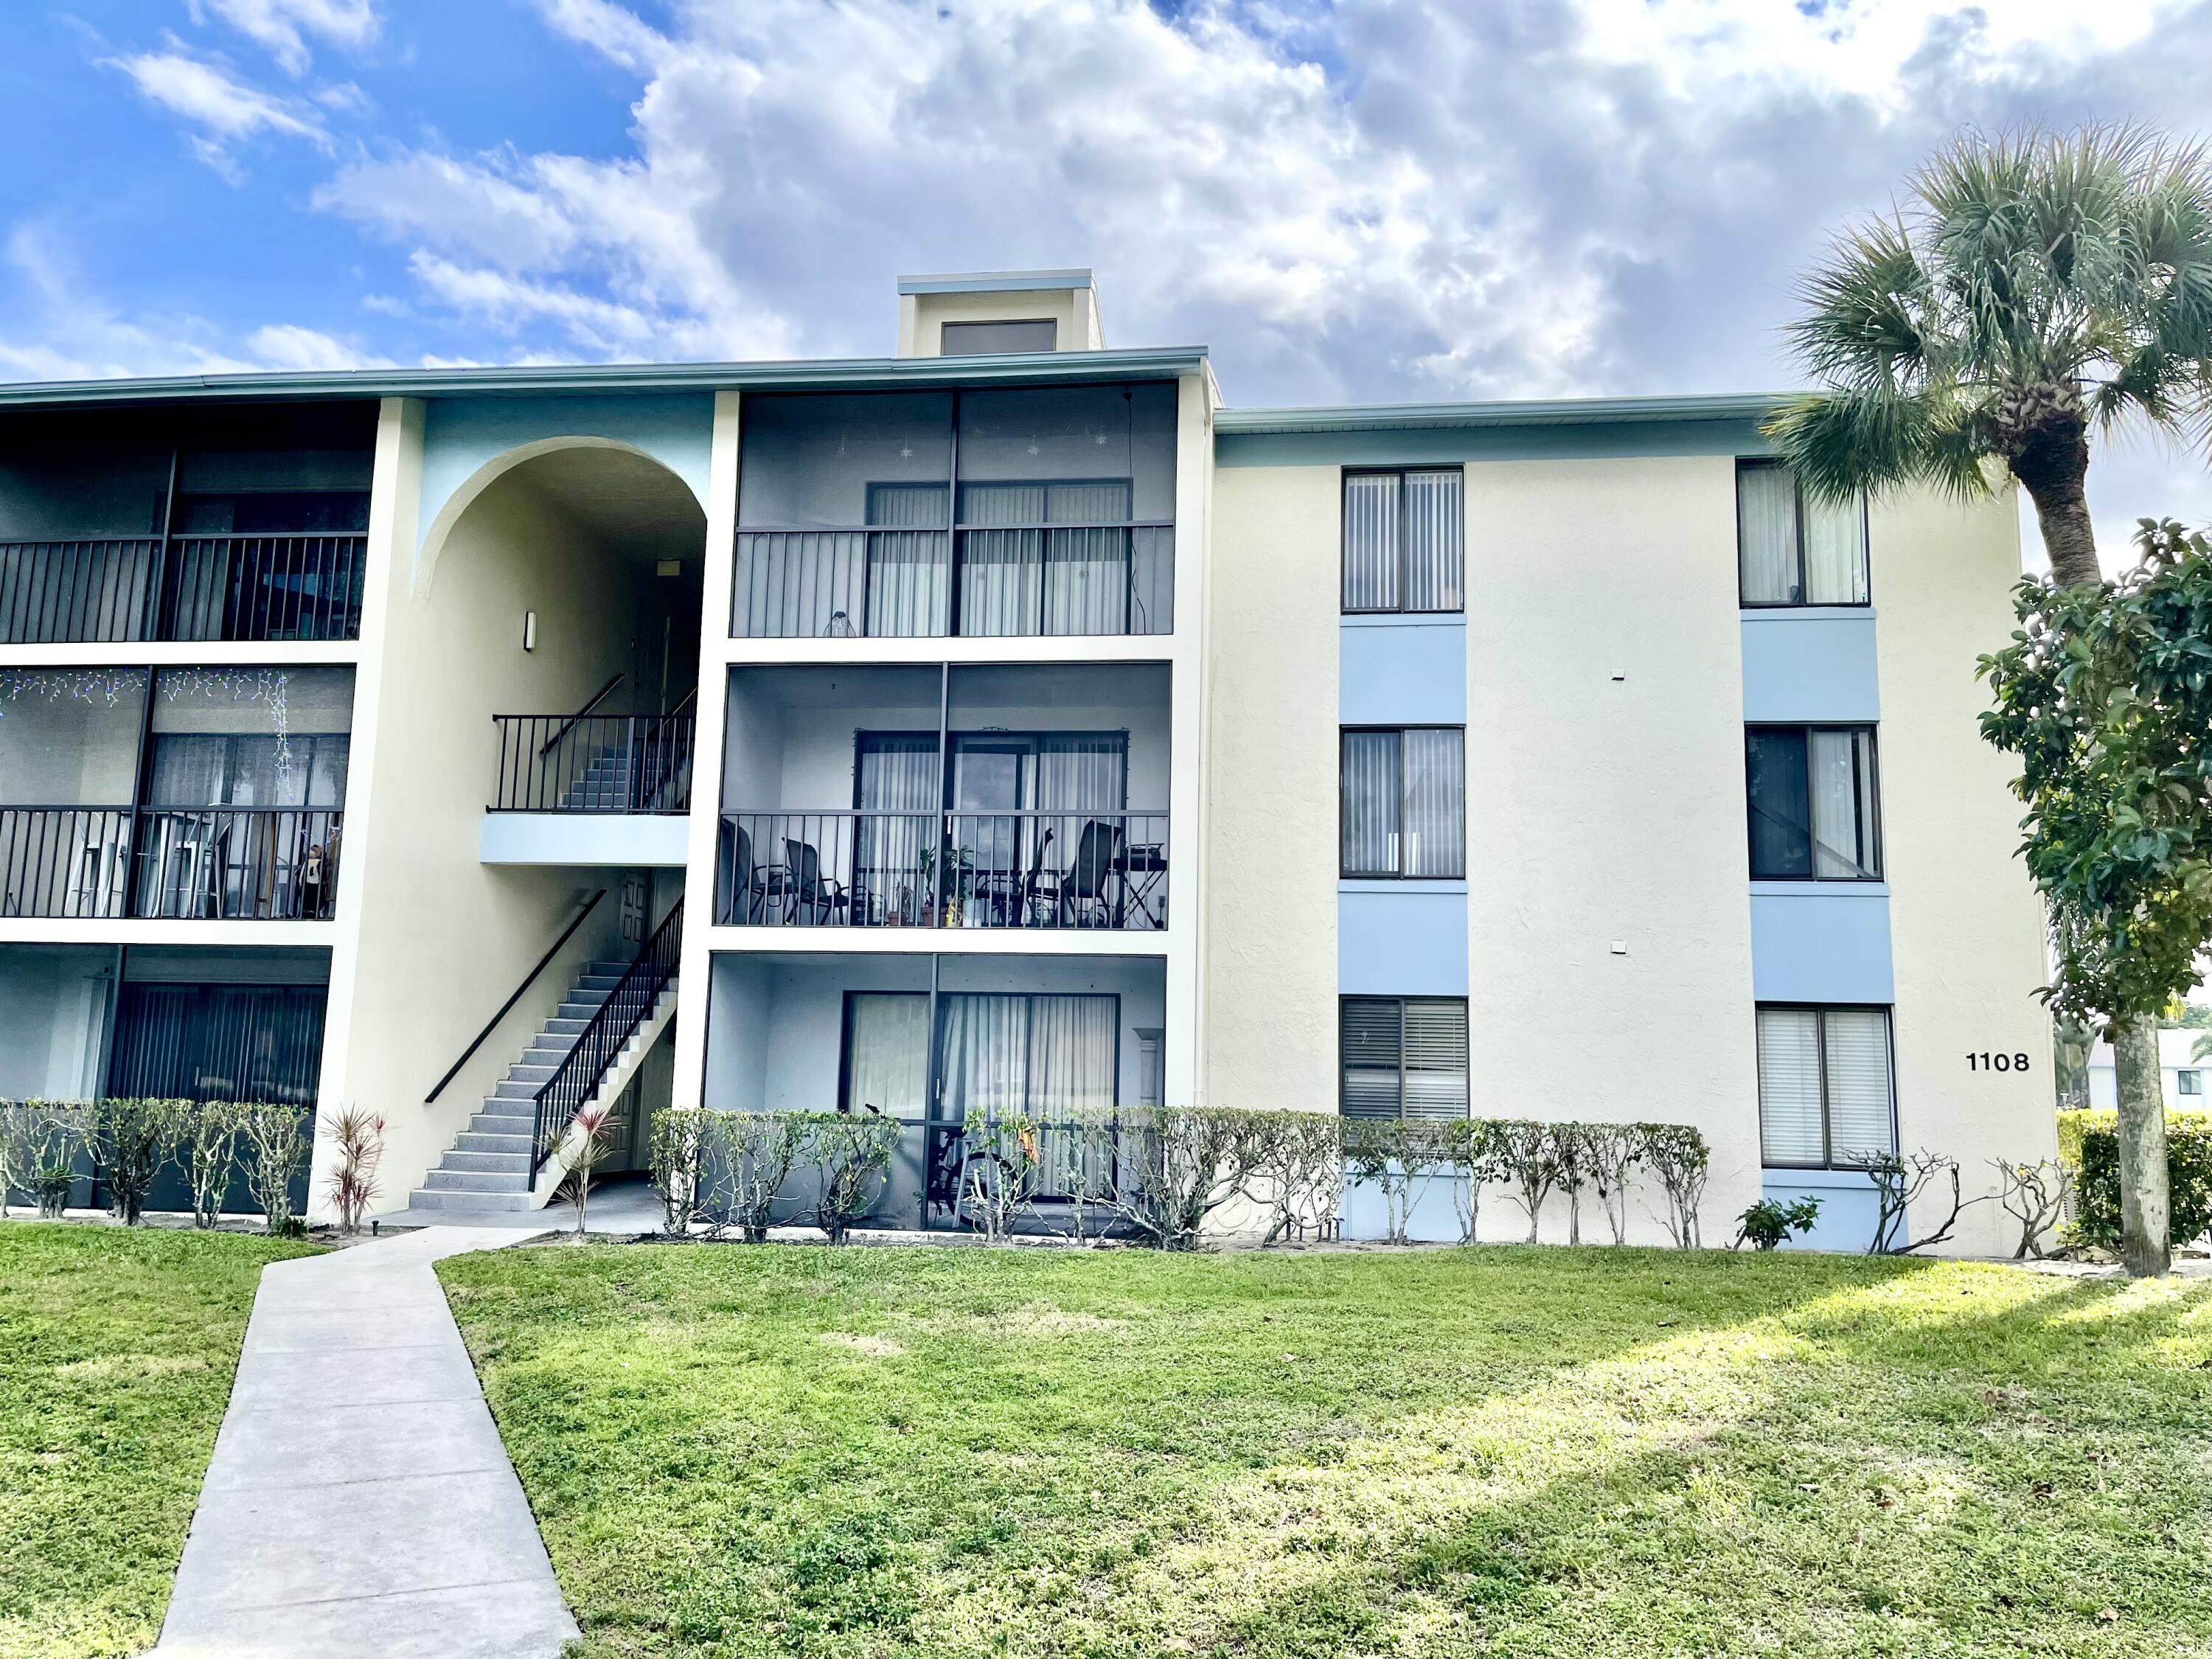 Property for Sale at 1108 Green Pine Boulevard G1, West Palm Beach, Palm Beach County, Florida - Bedrooms: 2 
Bathrooms: 2  - $224,950